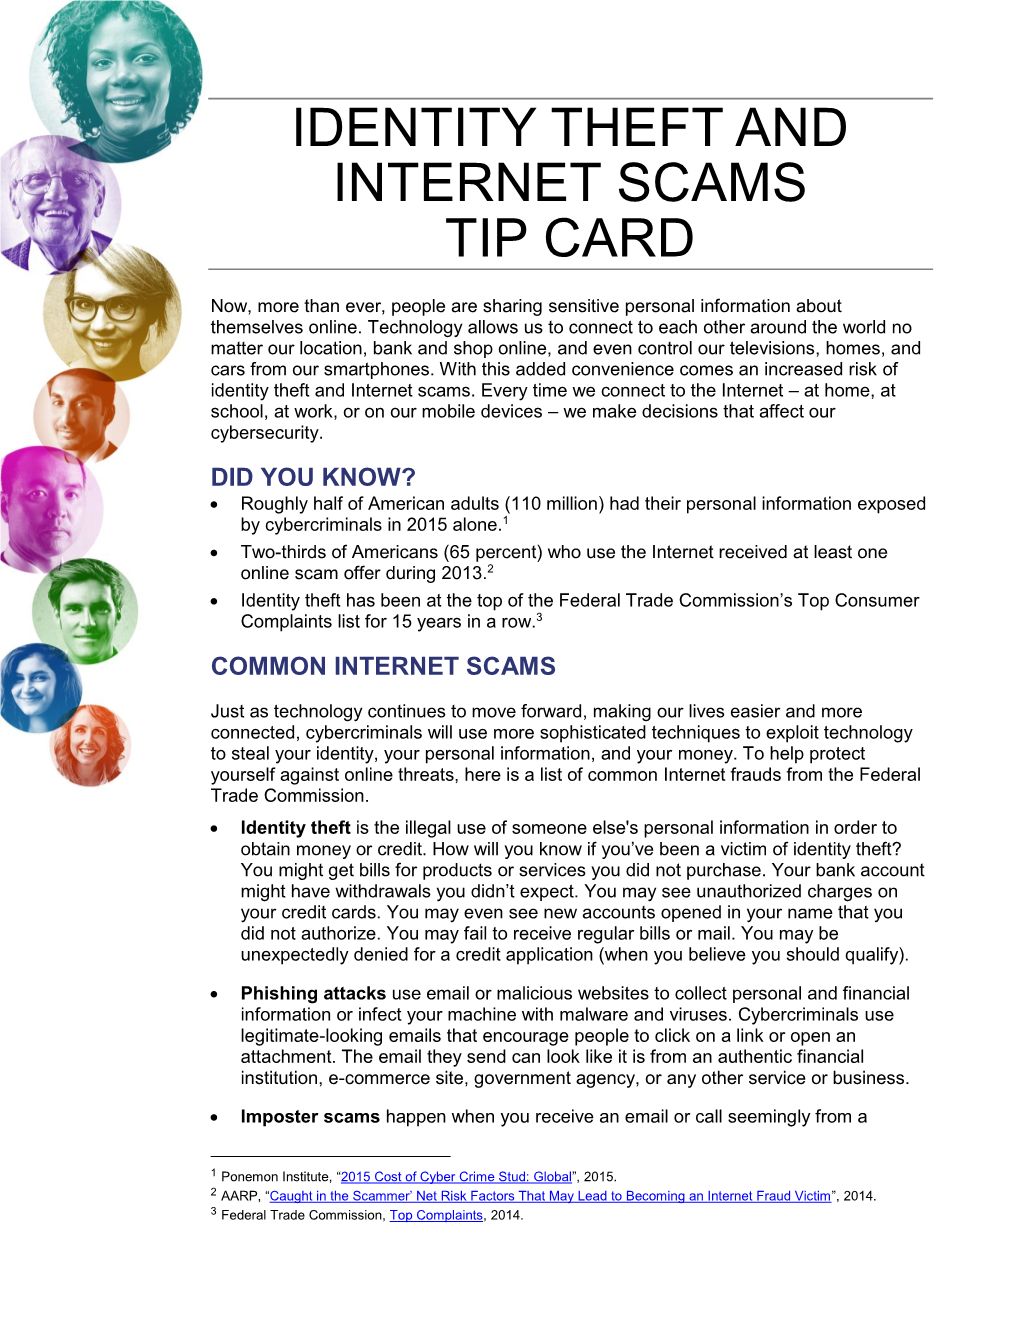 Identity Theft and Internet Scams Tip Card